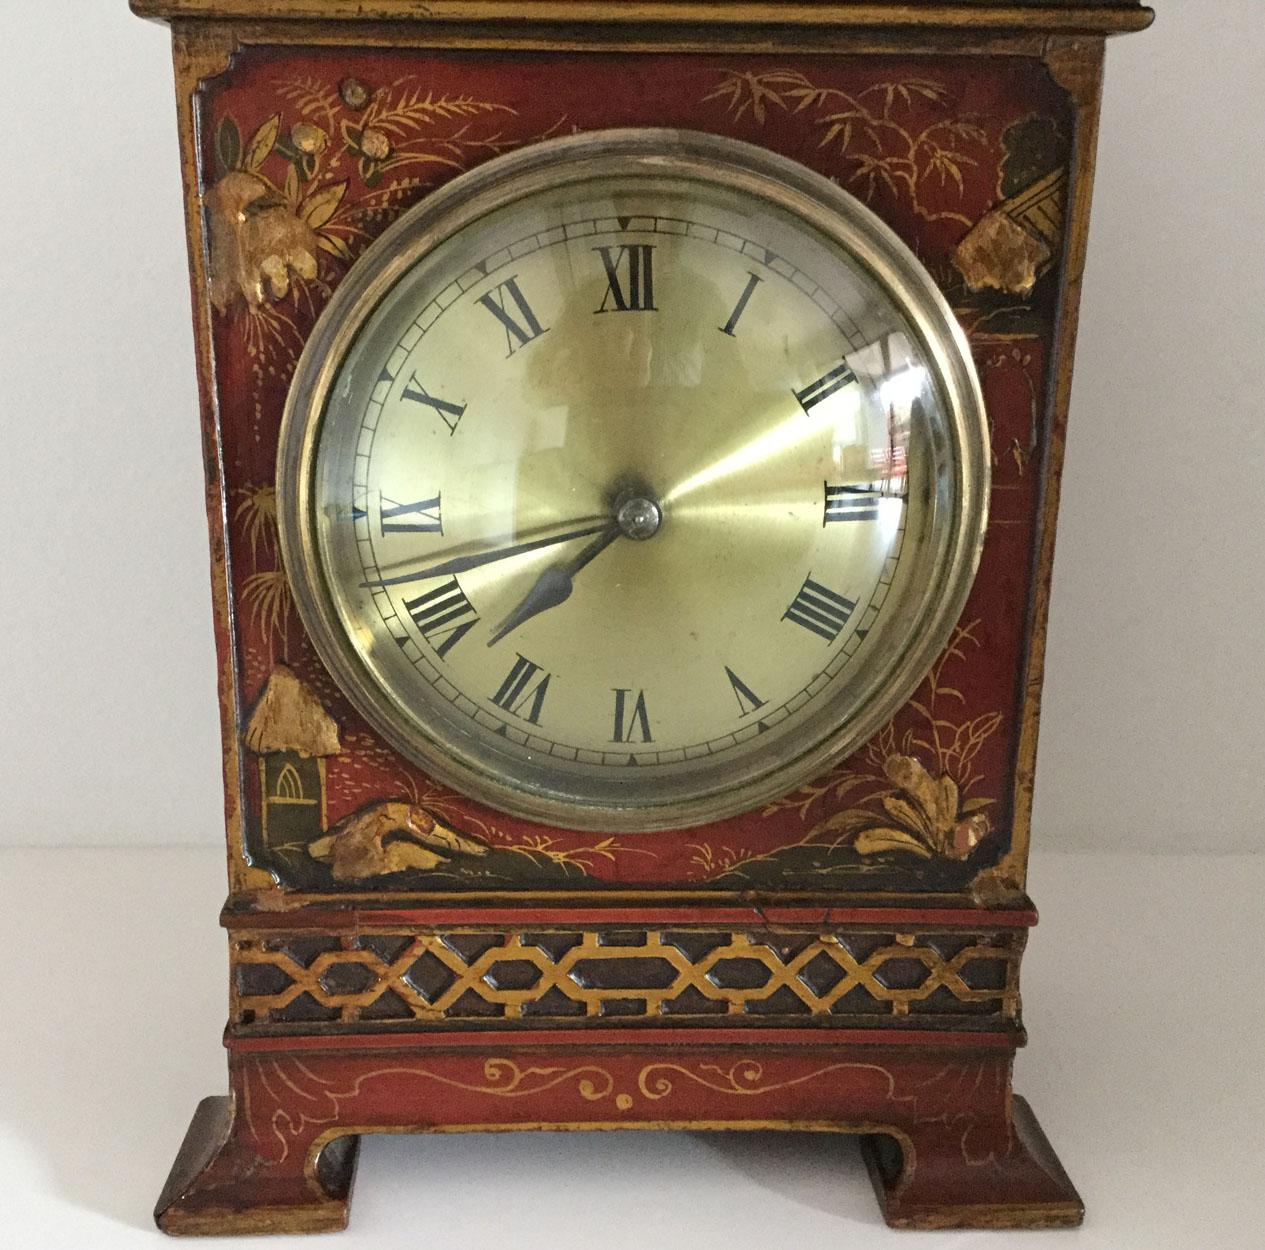 A decorative English red chinoiserie pagoda topped mantel (fireplace) clock circa 1920, the brass dial is in perfect condition. The pagoda top with gilt highlights, the rectangular case with geometric frieze decoration to the base and scenes of a